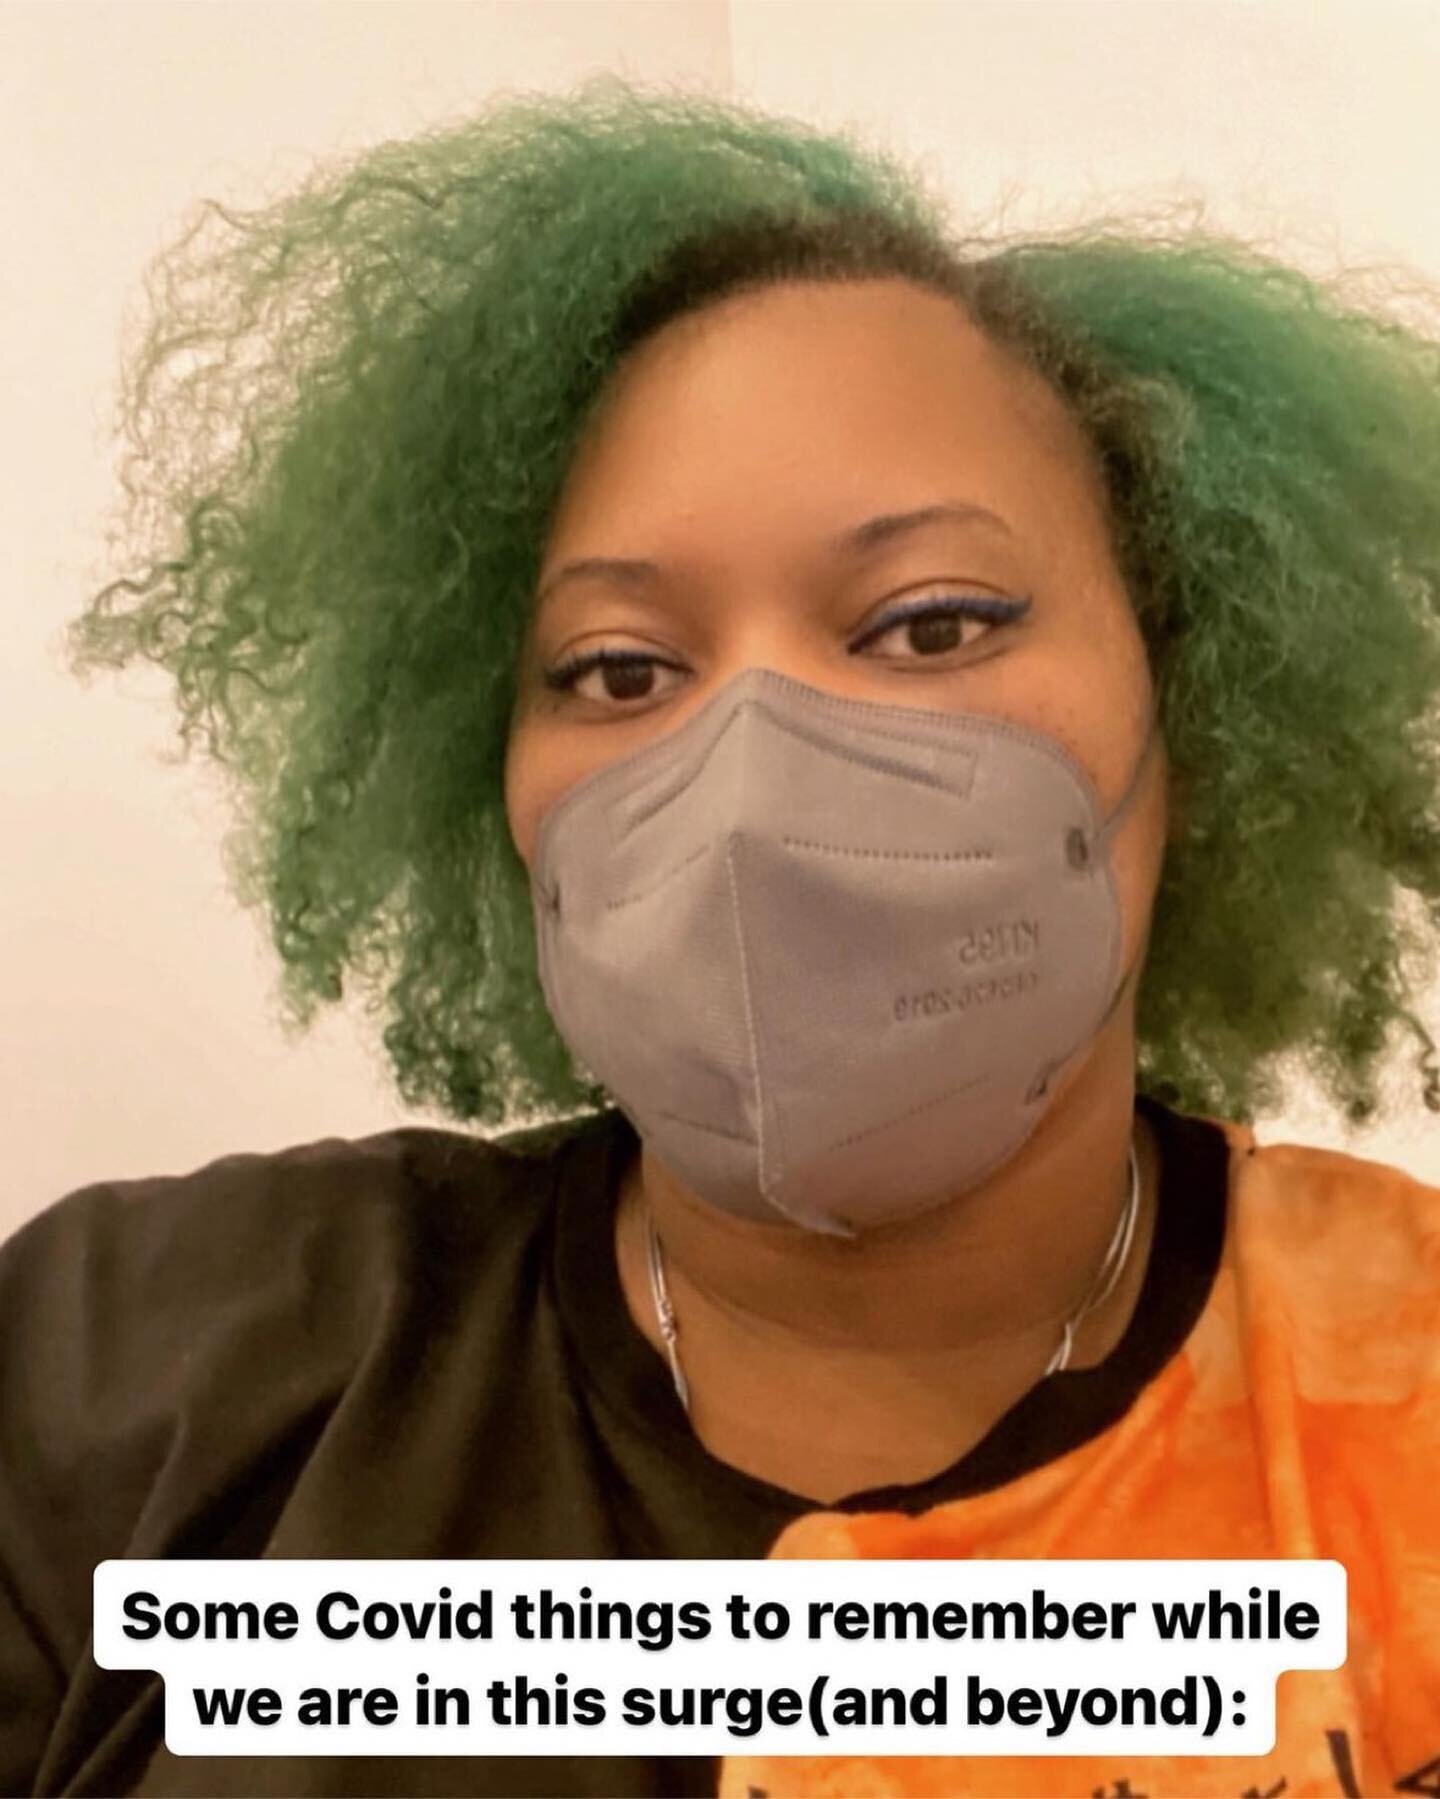 Repost, thank you for your work @shishi.rose 
This is information that everyone needs to have. 

Some Covid things to remember while we are in this surge(and beyond): 👉🏾 Scroll

1. If you get sick and you test and it comes up negative you can not s